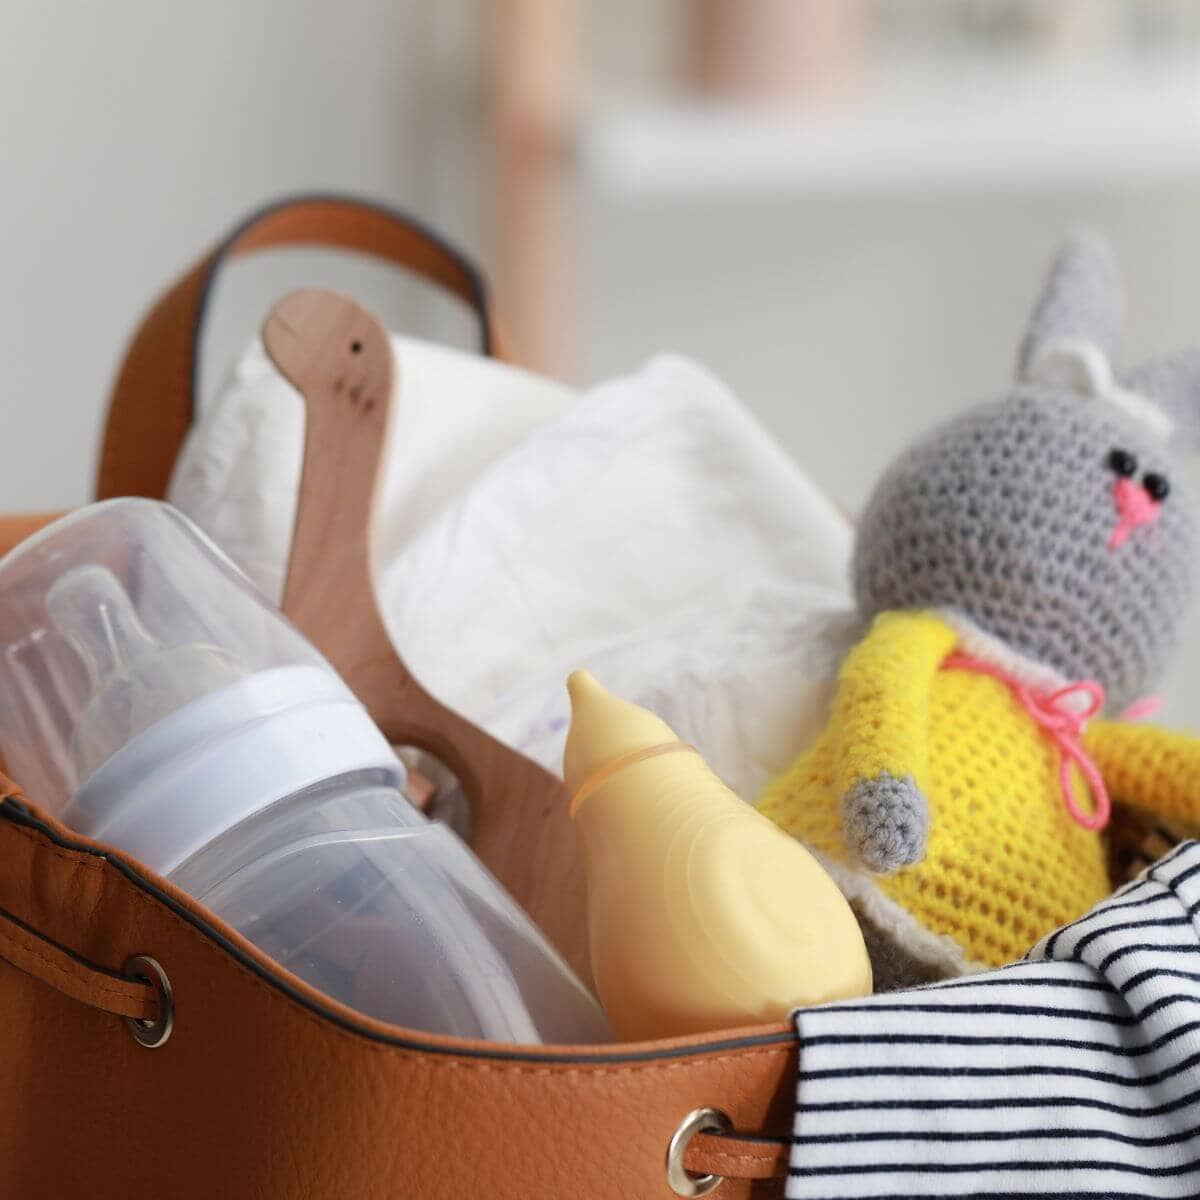 In a camel colored bag is diapers, a bottle, a nasal aspirator, a white and black striped outfit and a grey bunny with a yellow dress.